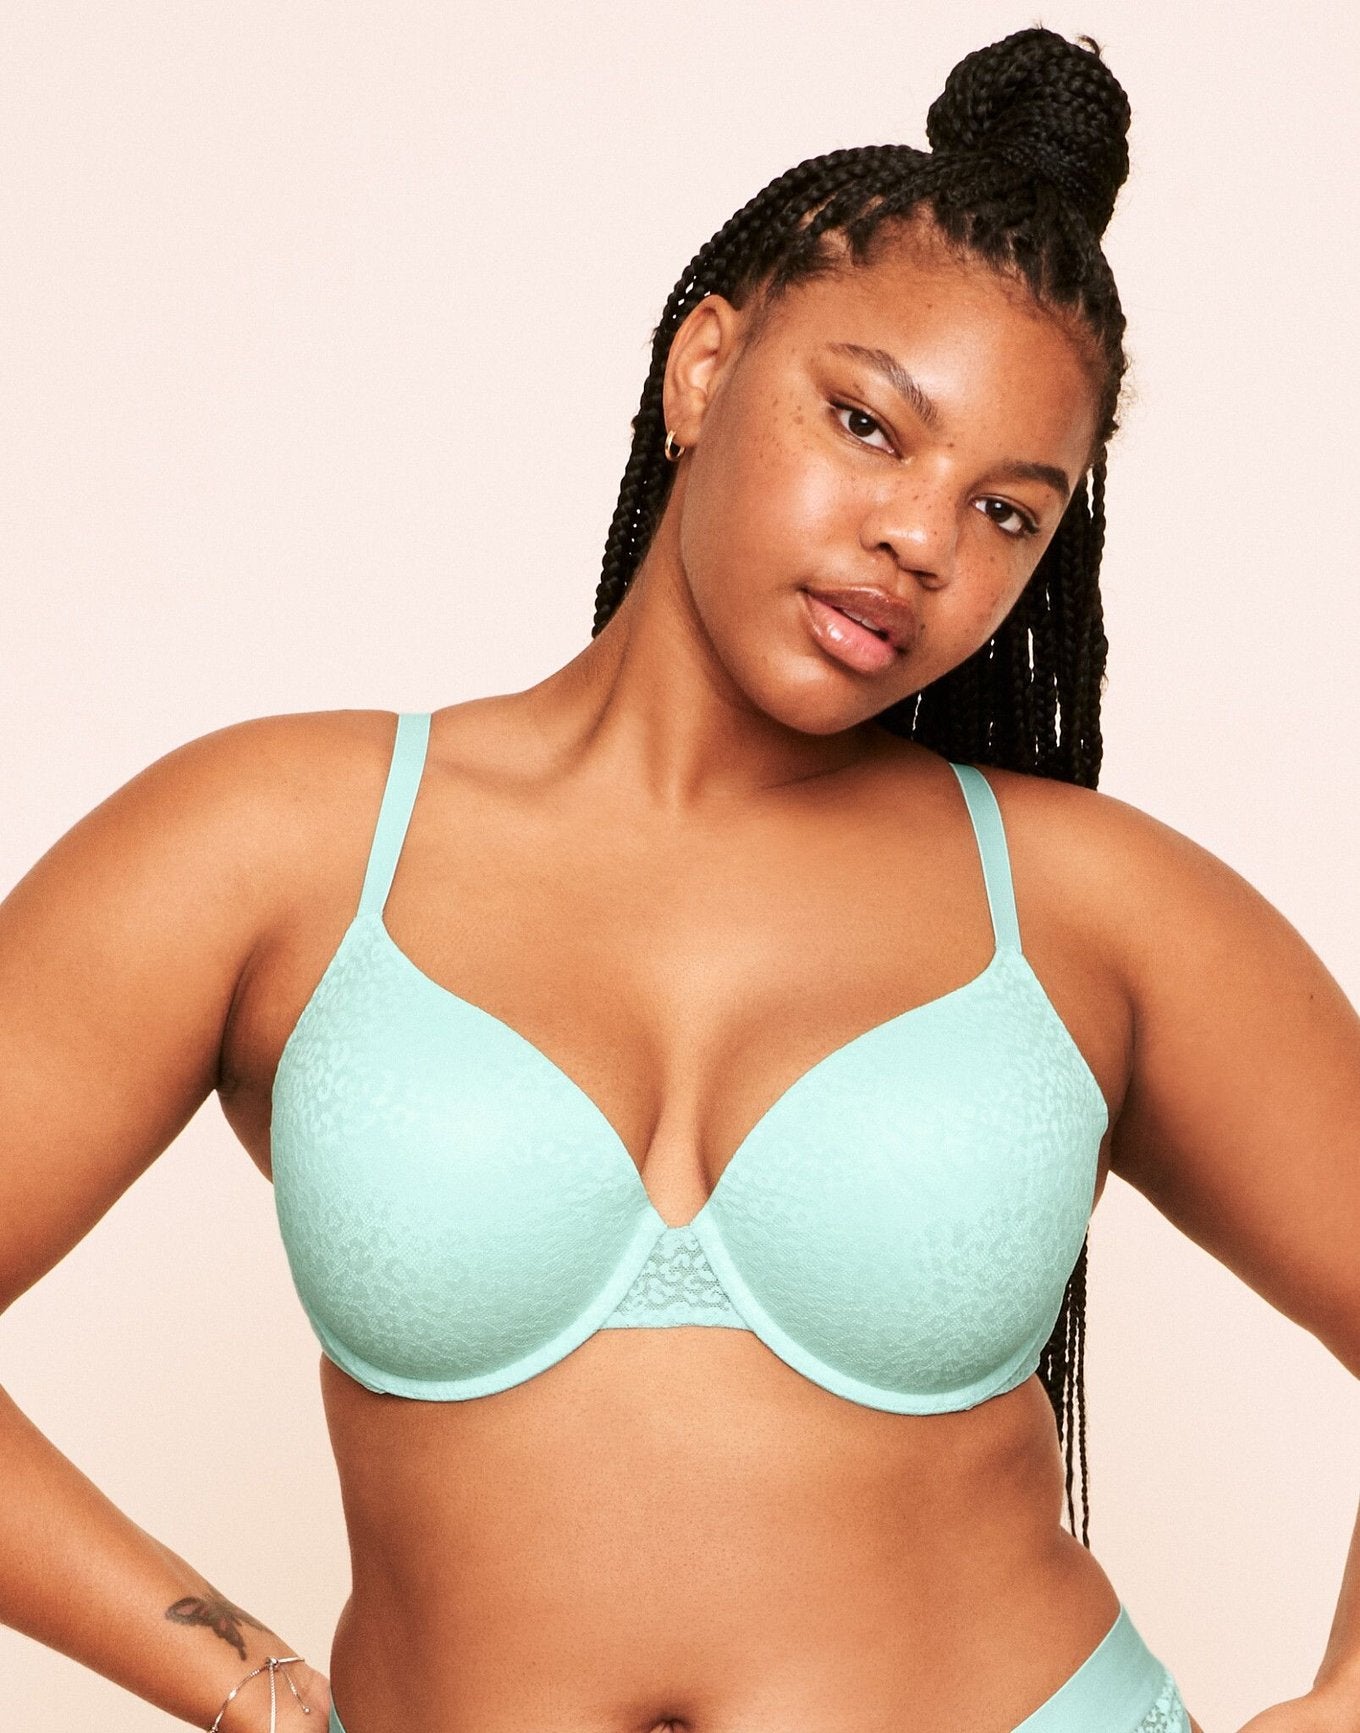 Earth Republic Dayana Lace Push Up Bra Lace Bra in color Bay and shape plunge